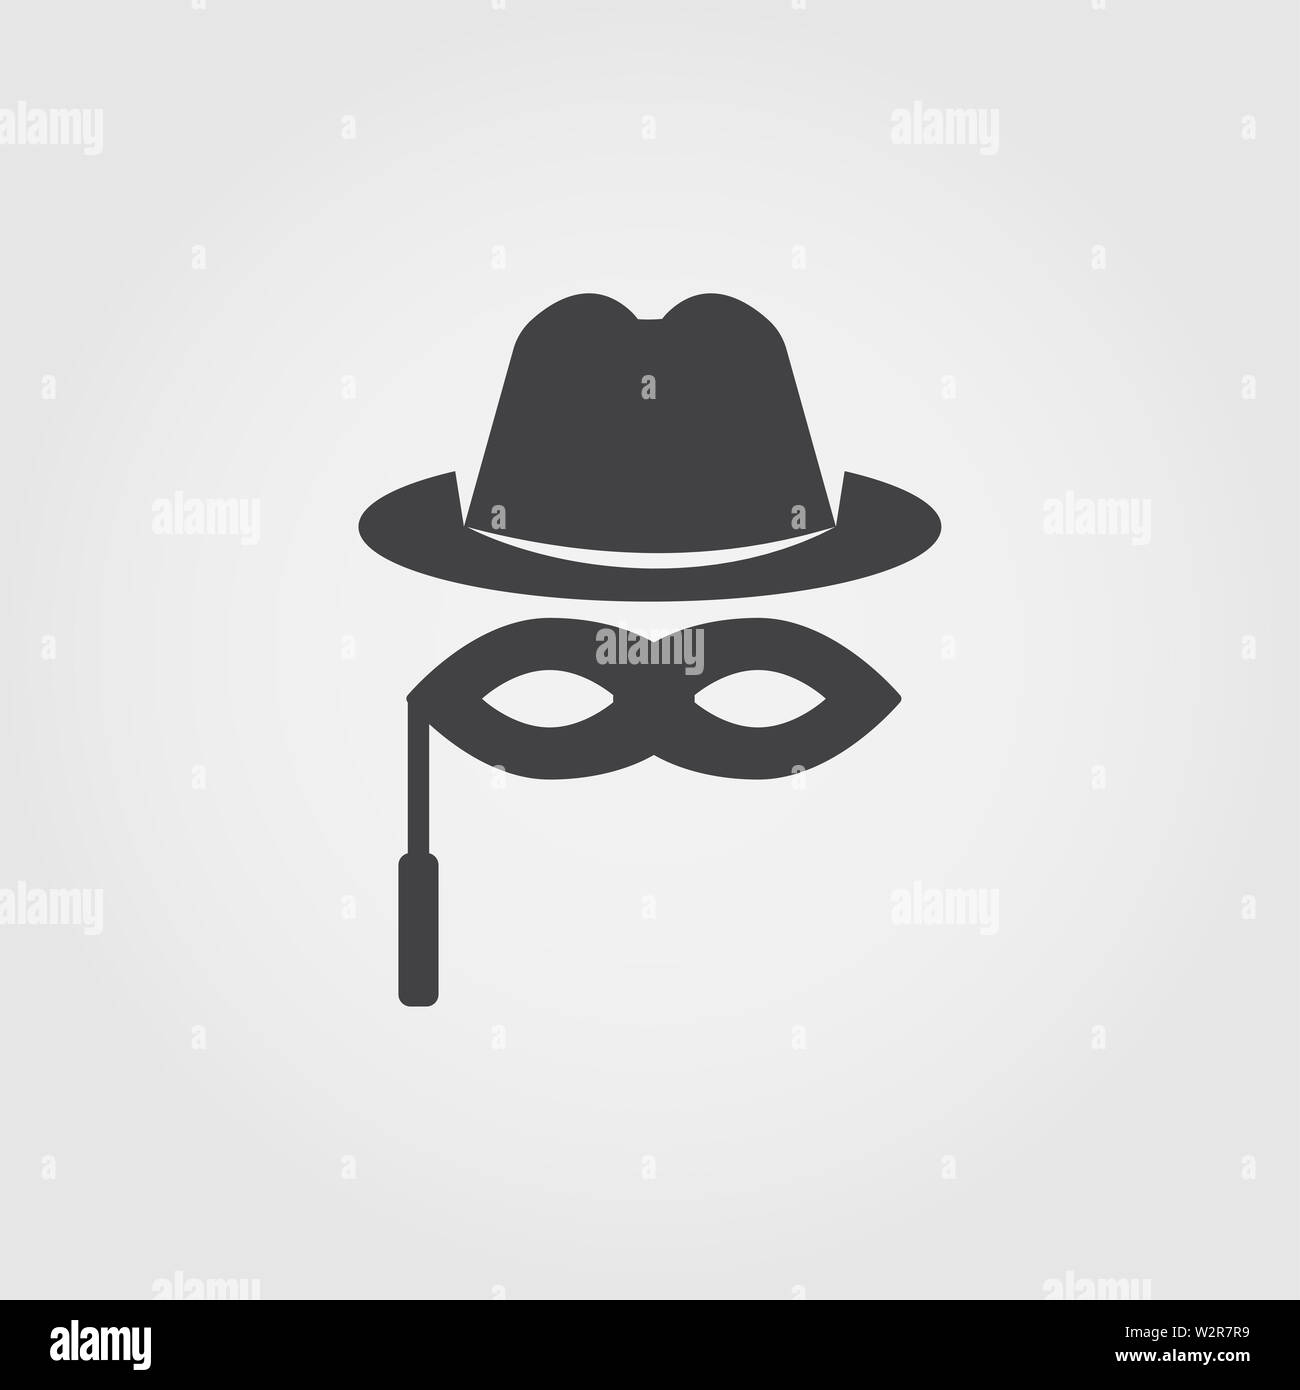 Anonymity flat icon. Monochrome creative design from blockchain icons collection. Simple sign illustration anonymity icon for mobile and web usage Stock Photo